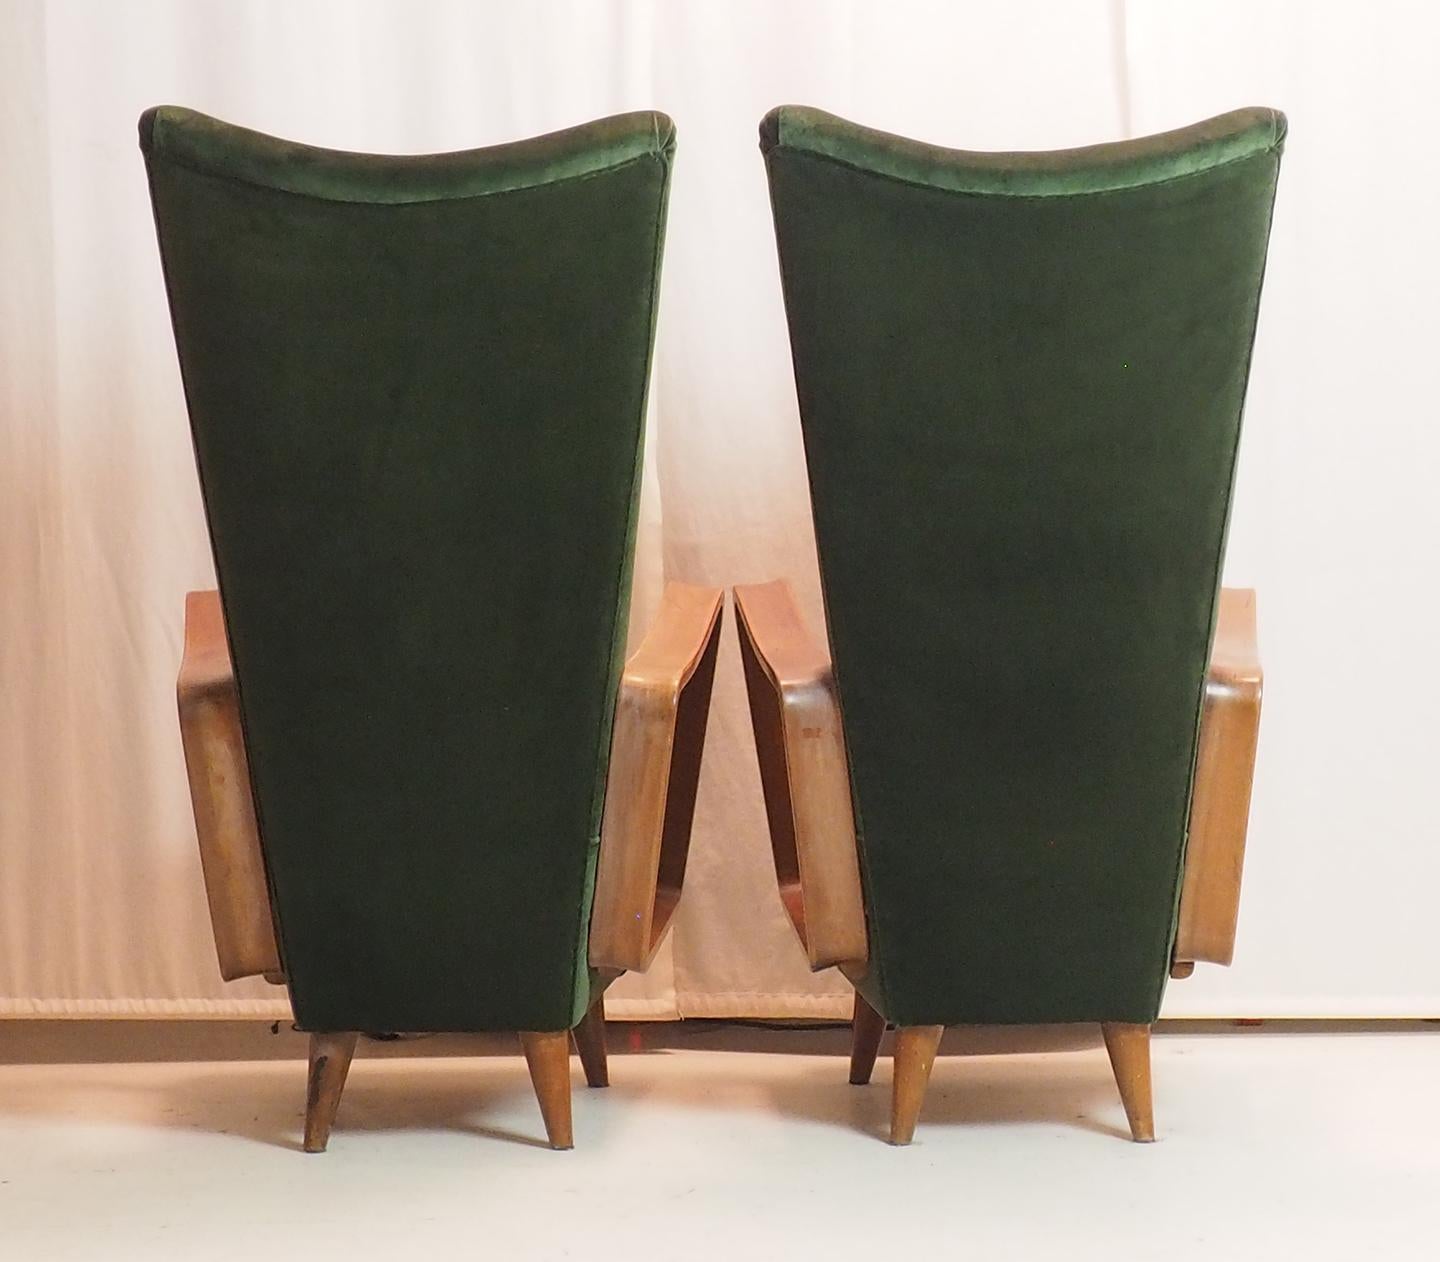 Midcentury High Back Italian Green Armchairs by Pietro Lingeri, Italy, 1950s For Sale 7